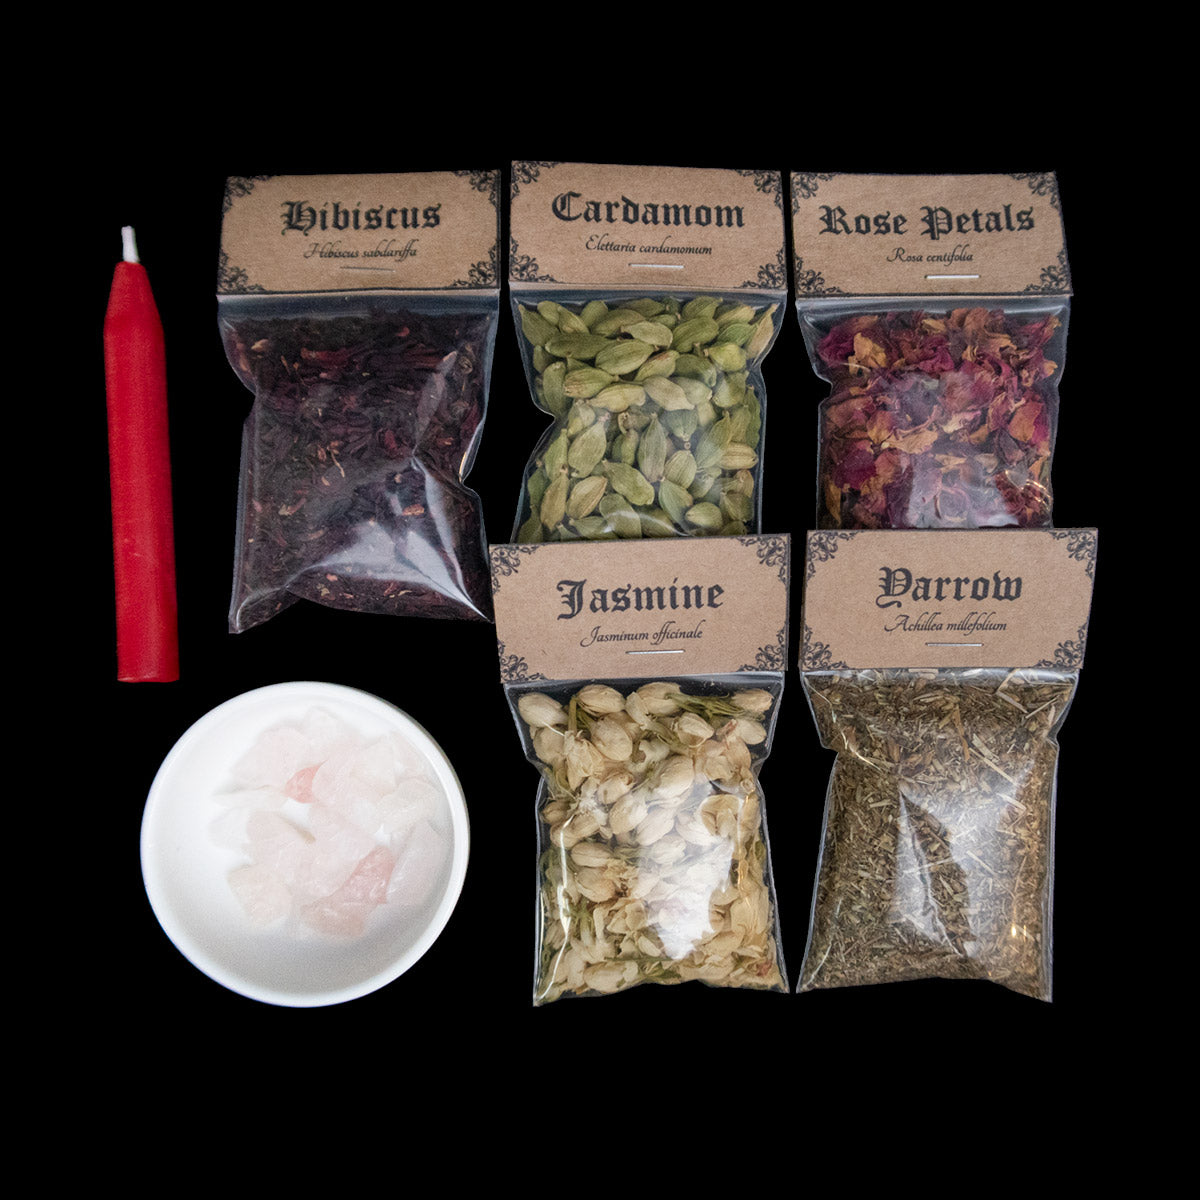 A red chime candle, small bowl of large rose quartz crystal chips, and 5 bags of herbs with Victorian-apothecary-style brown labels at the top give the common and Latin names